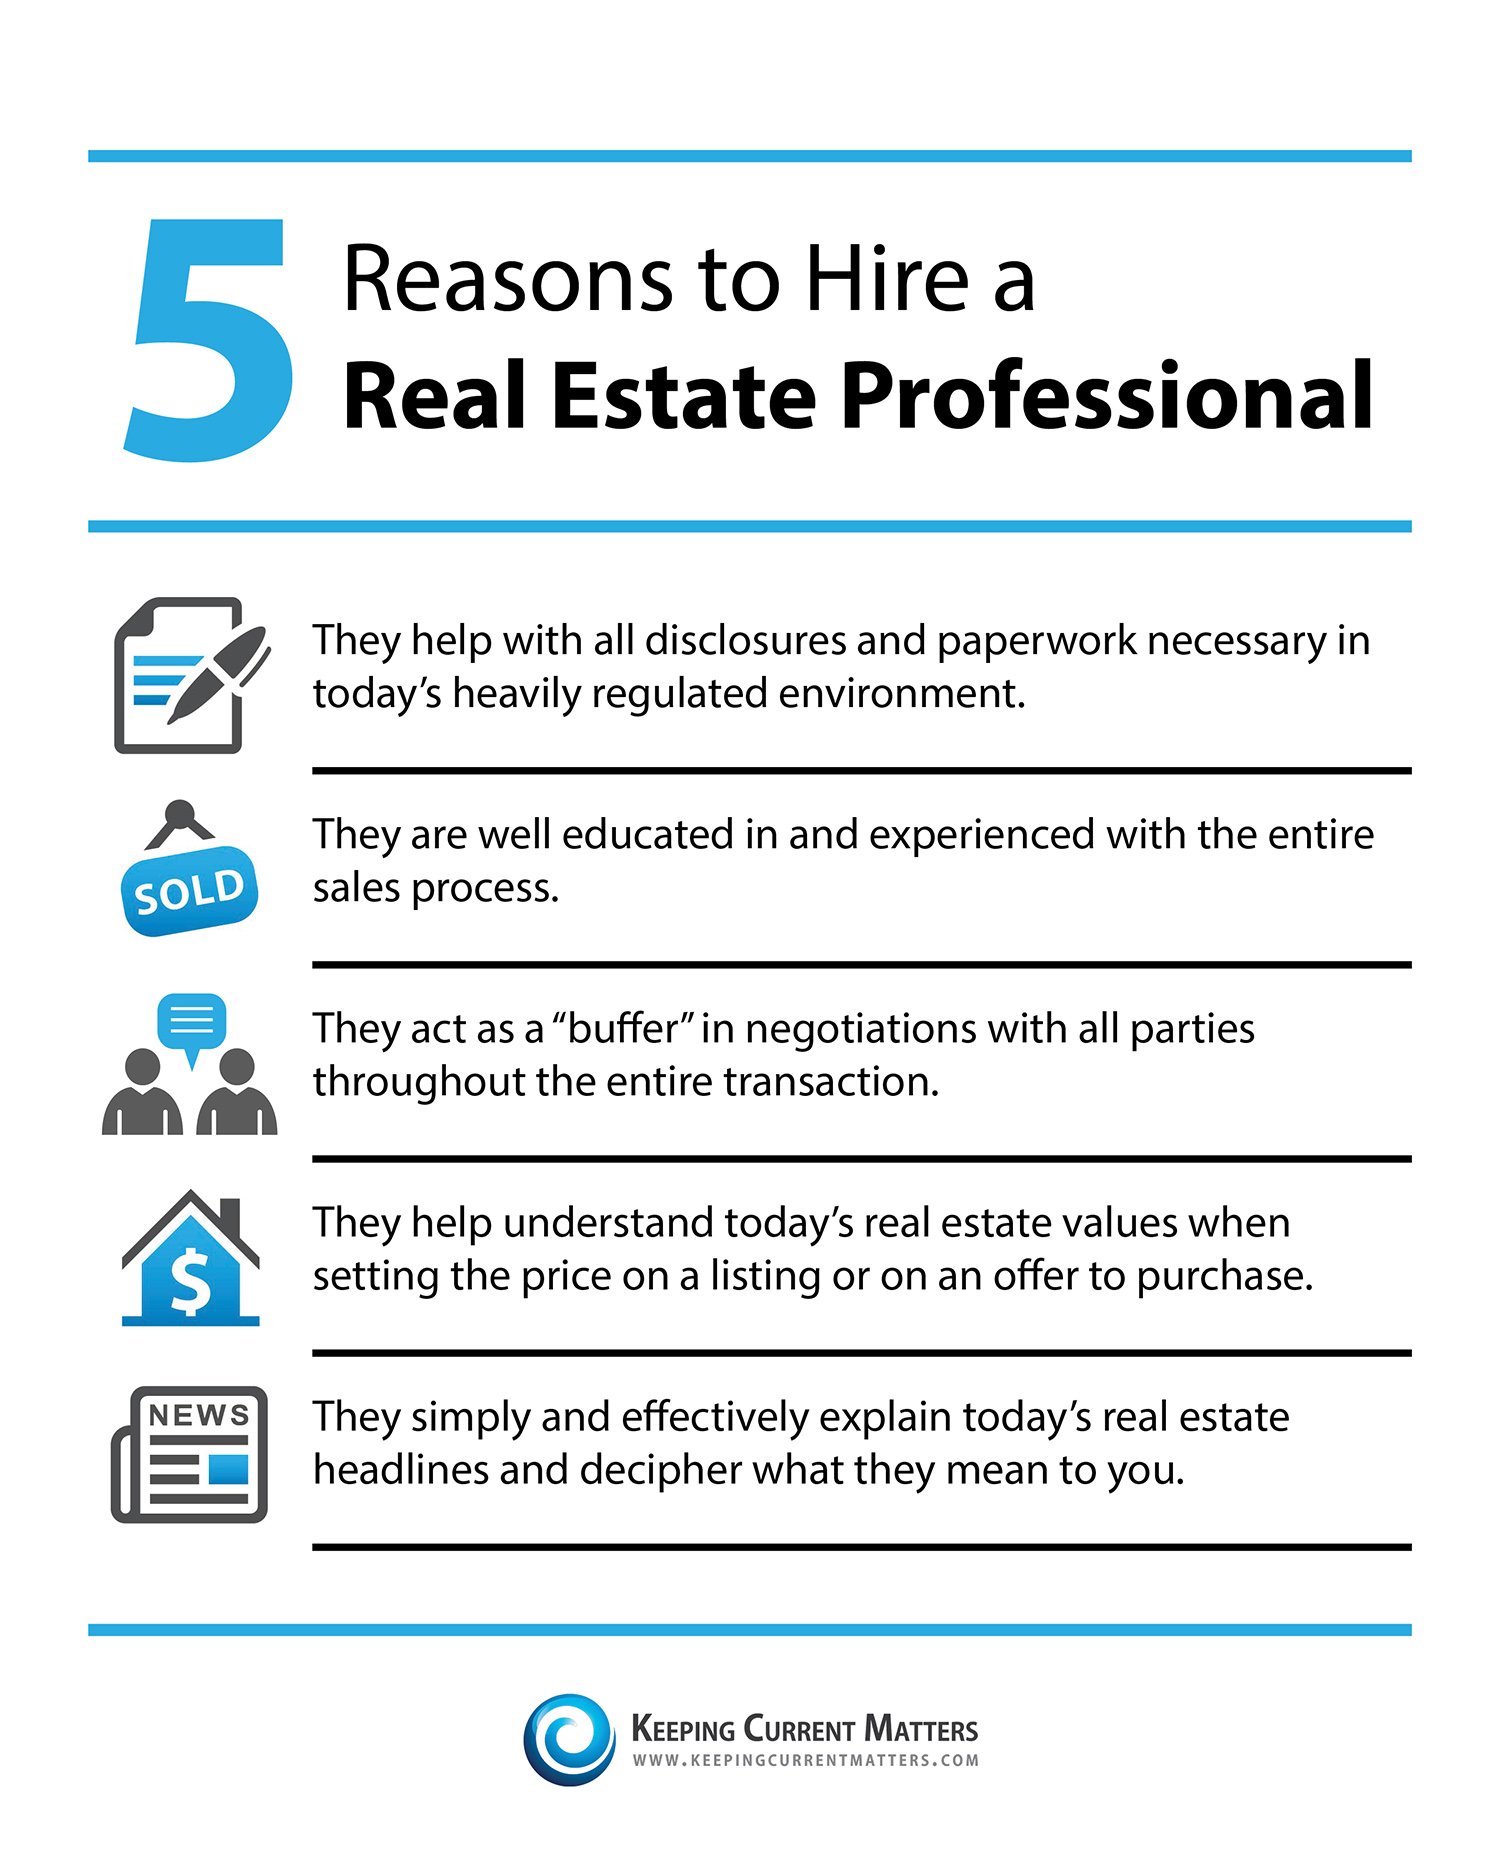 5 Reasons to Hire a Real Estate Professional | The KCM Crew